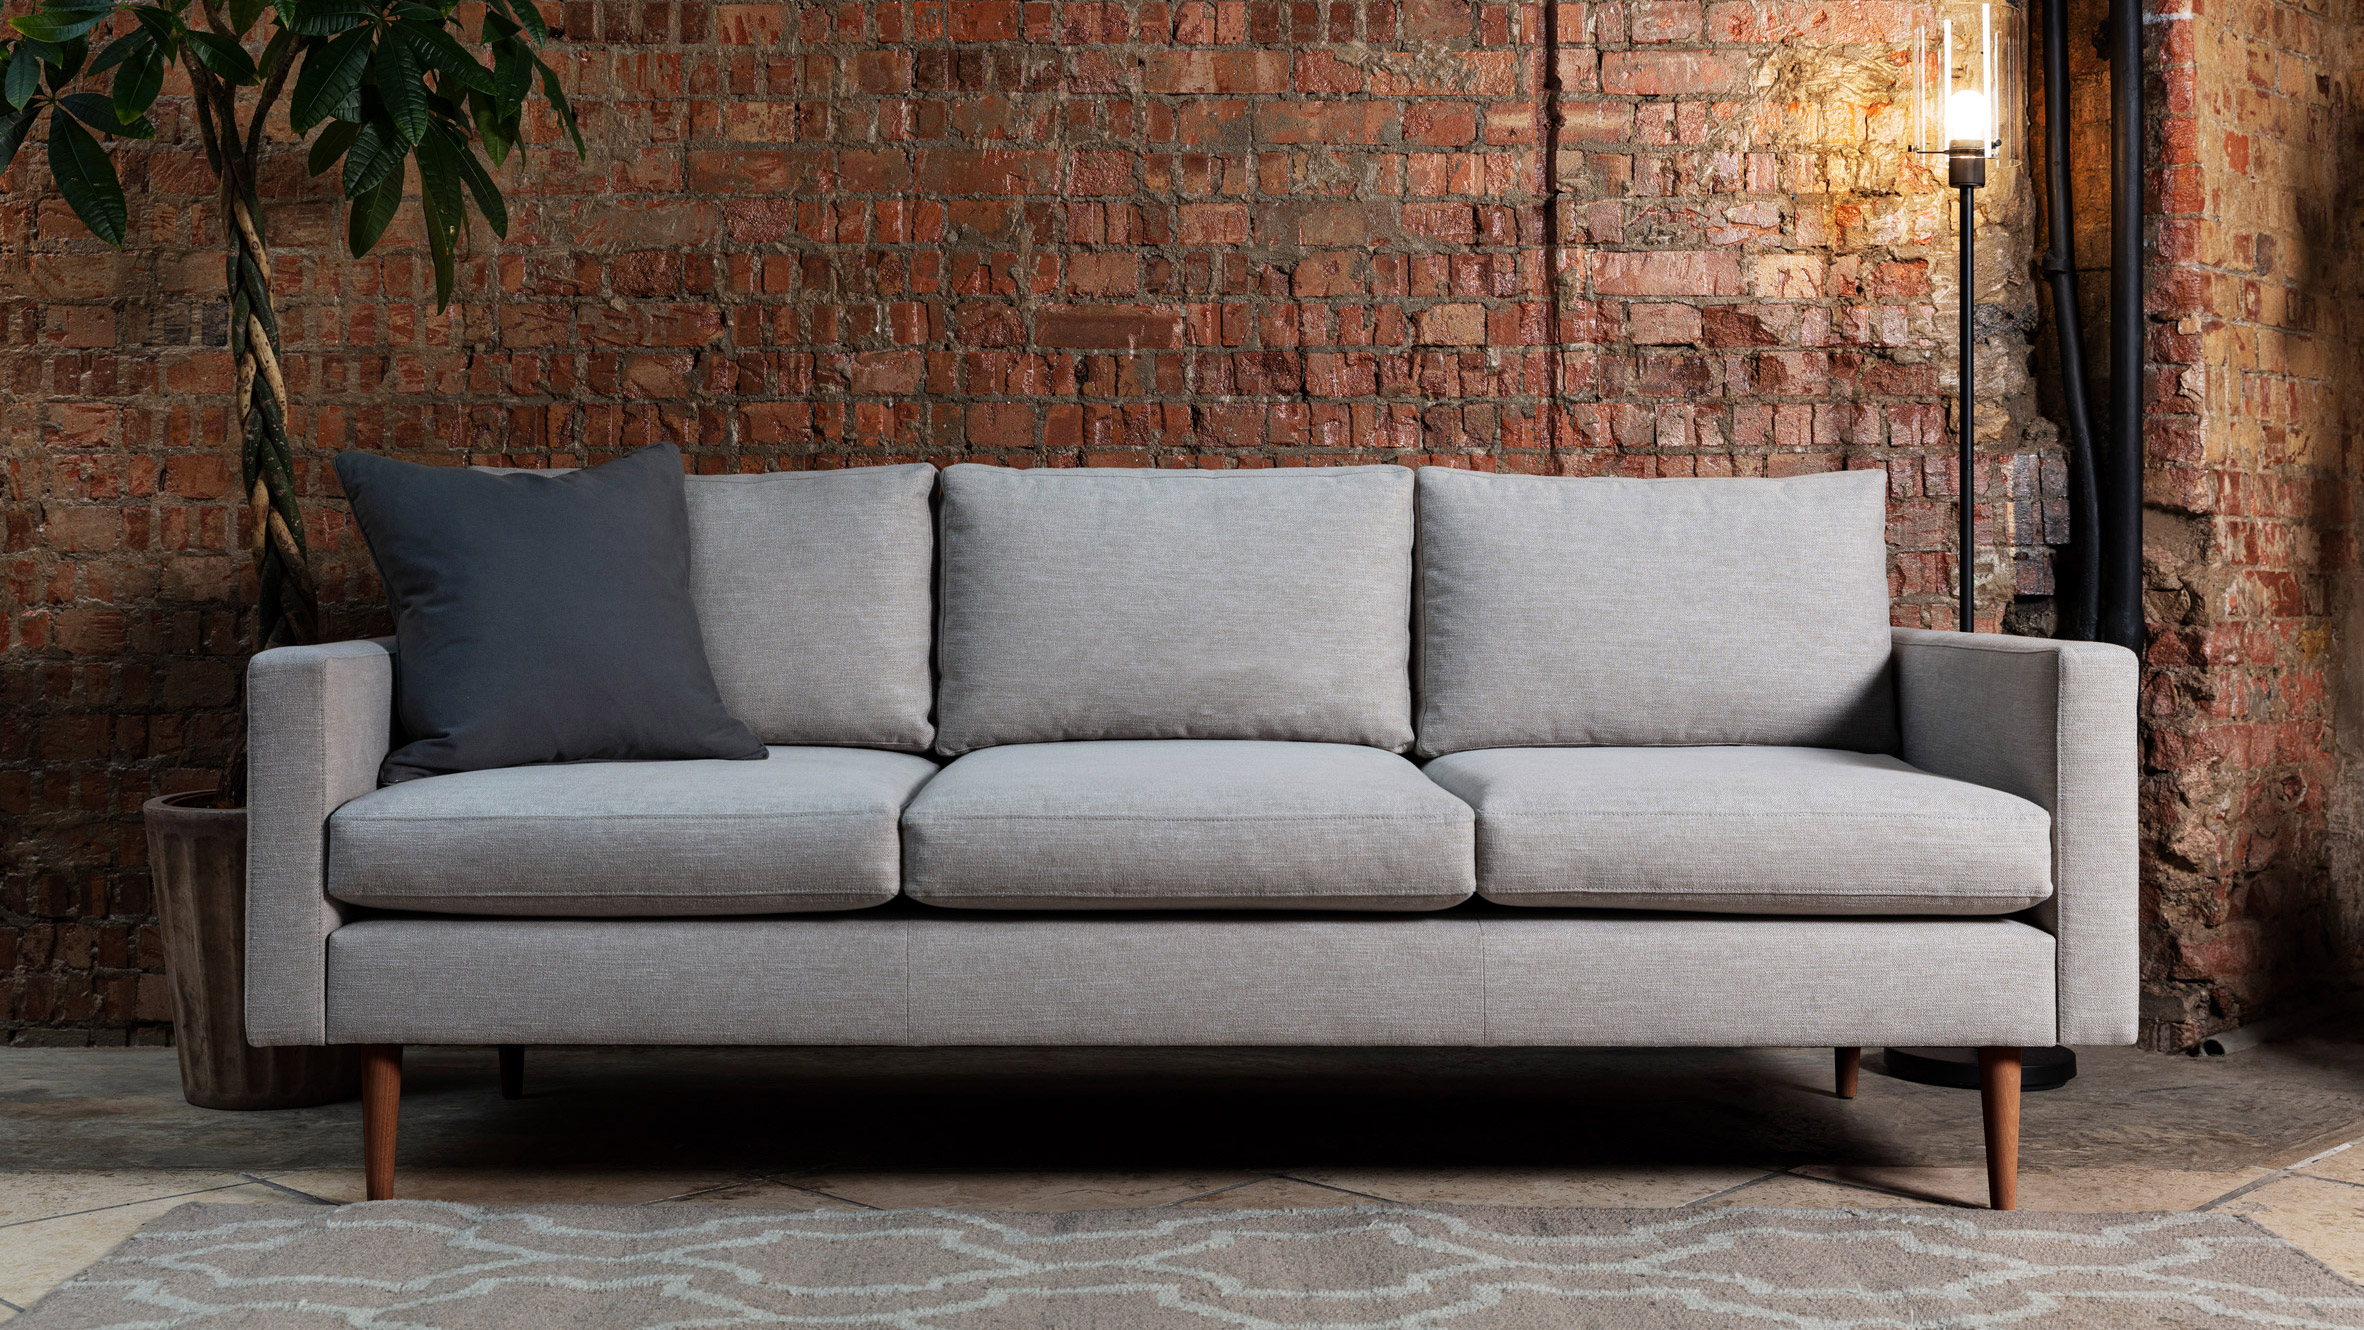 Swyft has created a sofa that arrives in boxes and clicks together